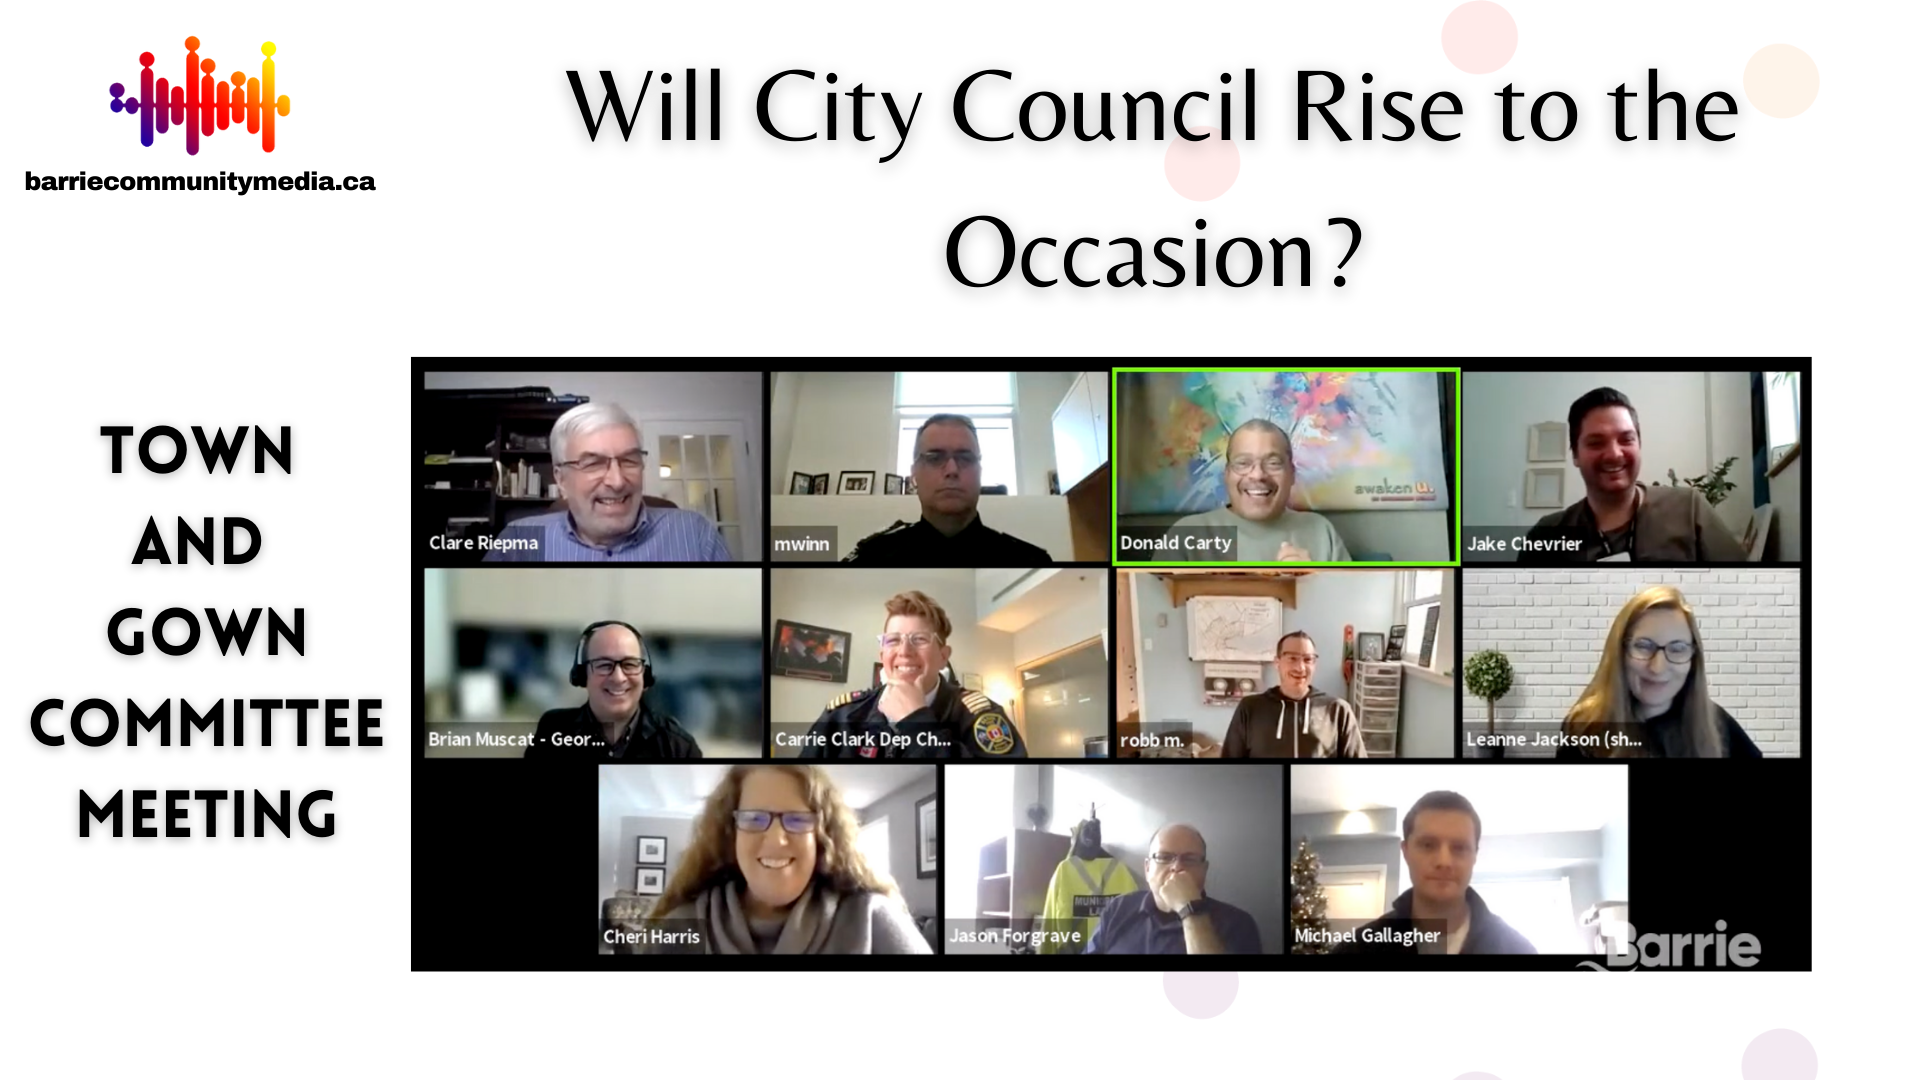 Will City Council Rise to the Occasion to Address Racism by Following Town and Gown Committee’s Lead?